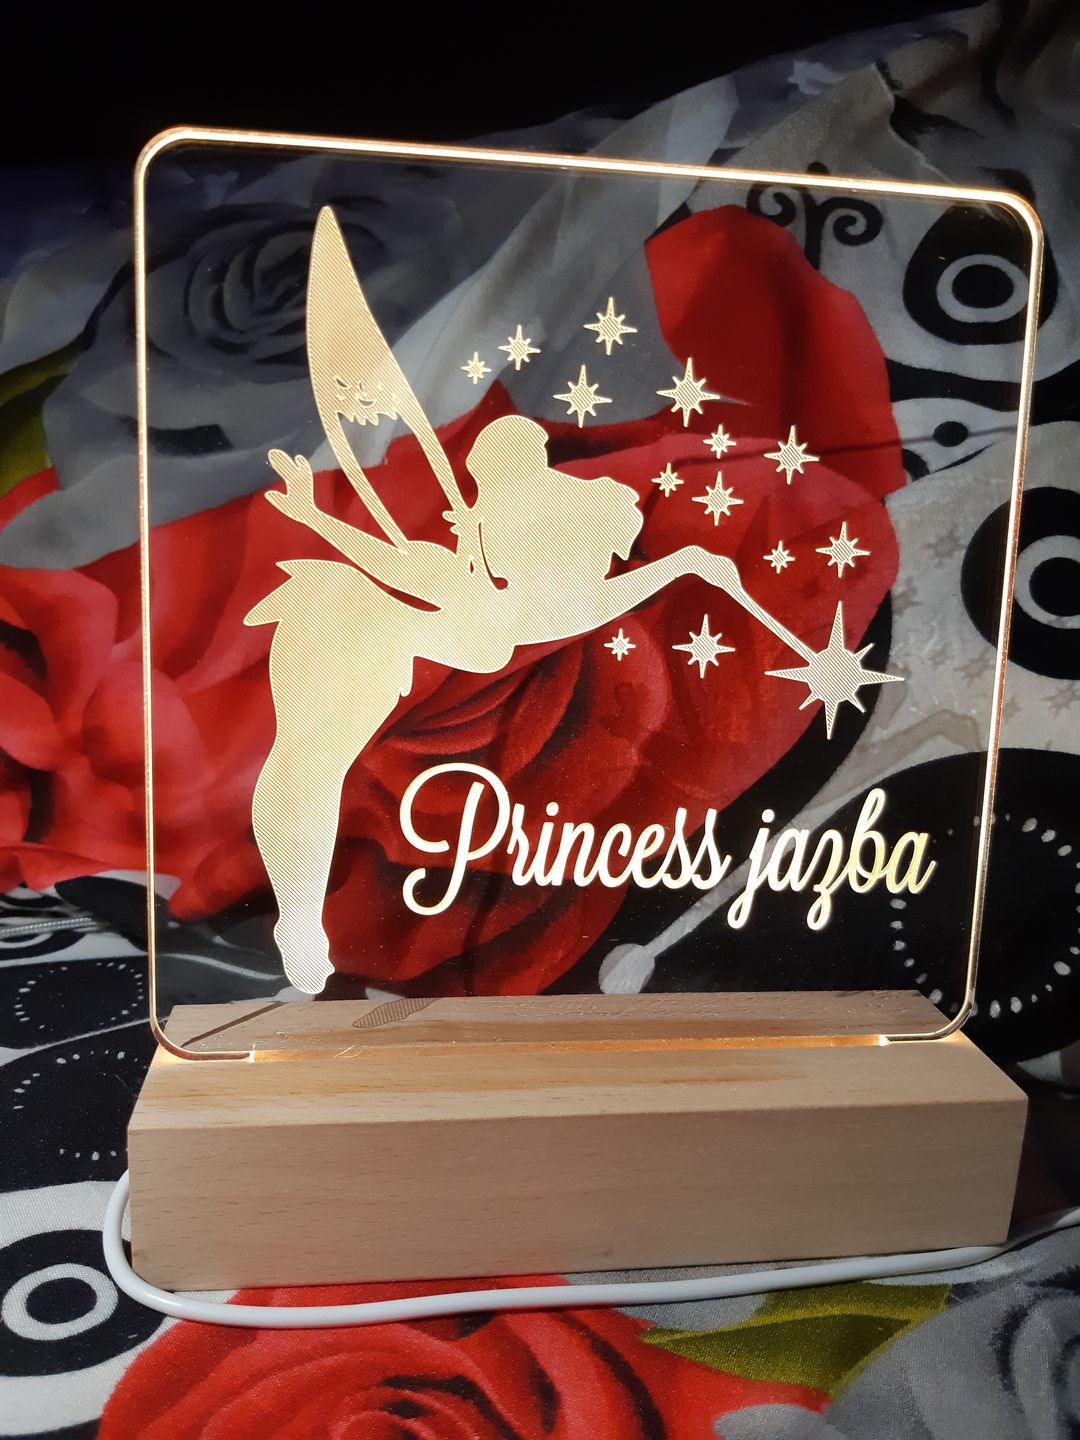 Fairy - Personalized Night Light - Brighter Made